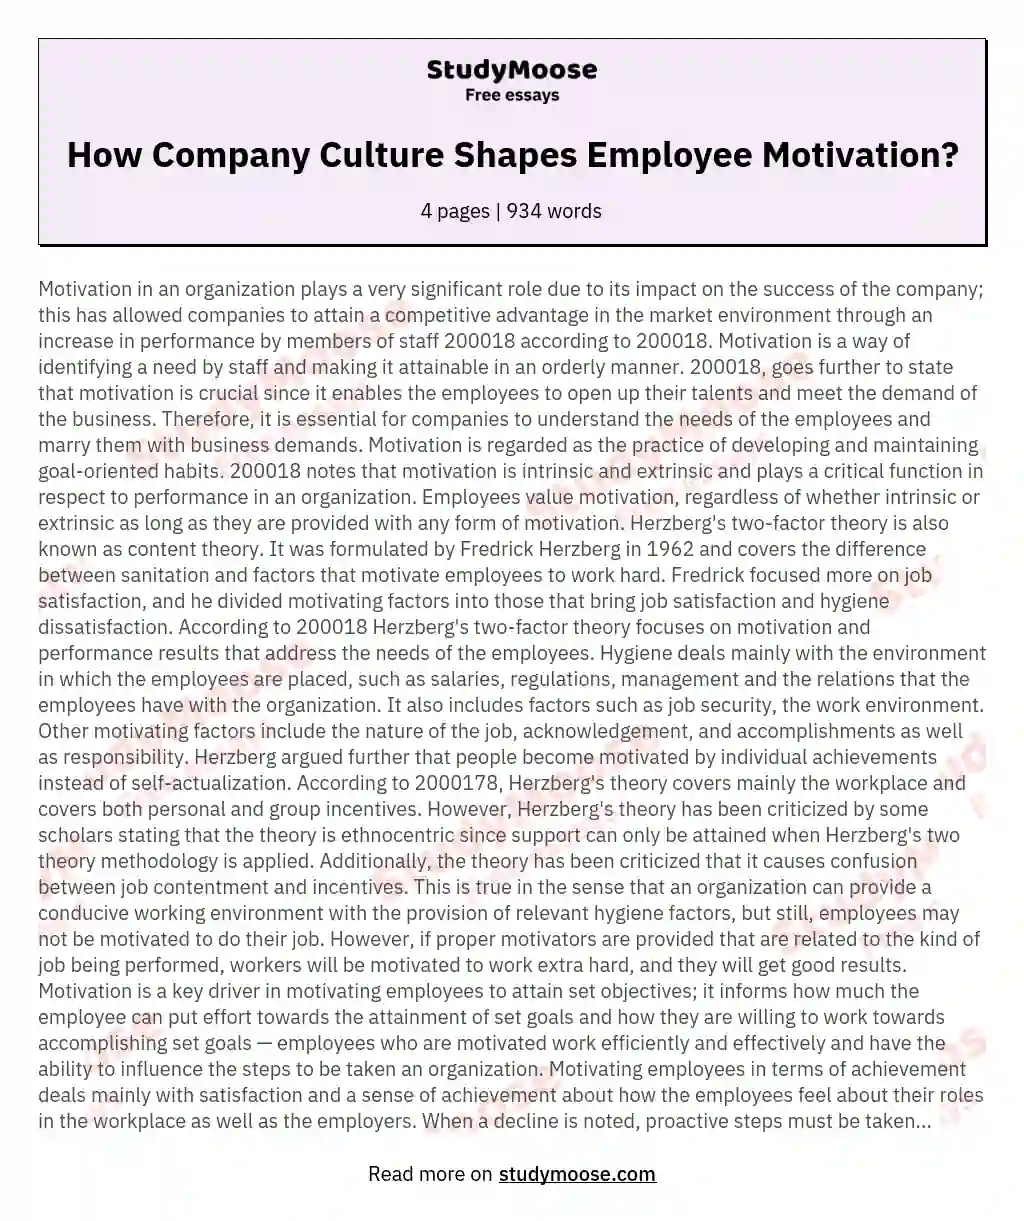 How Company Culture Shapes Employee Motivation?